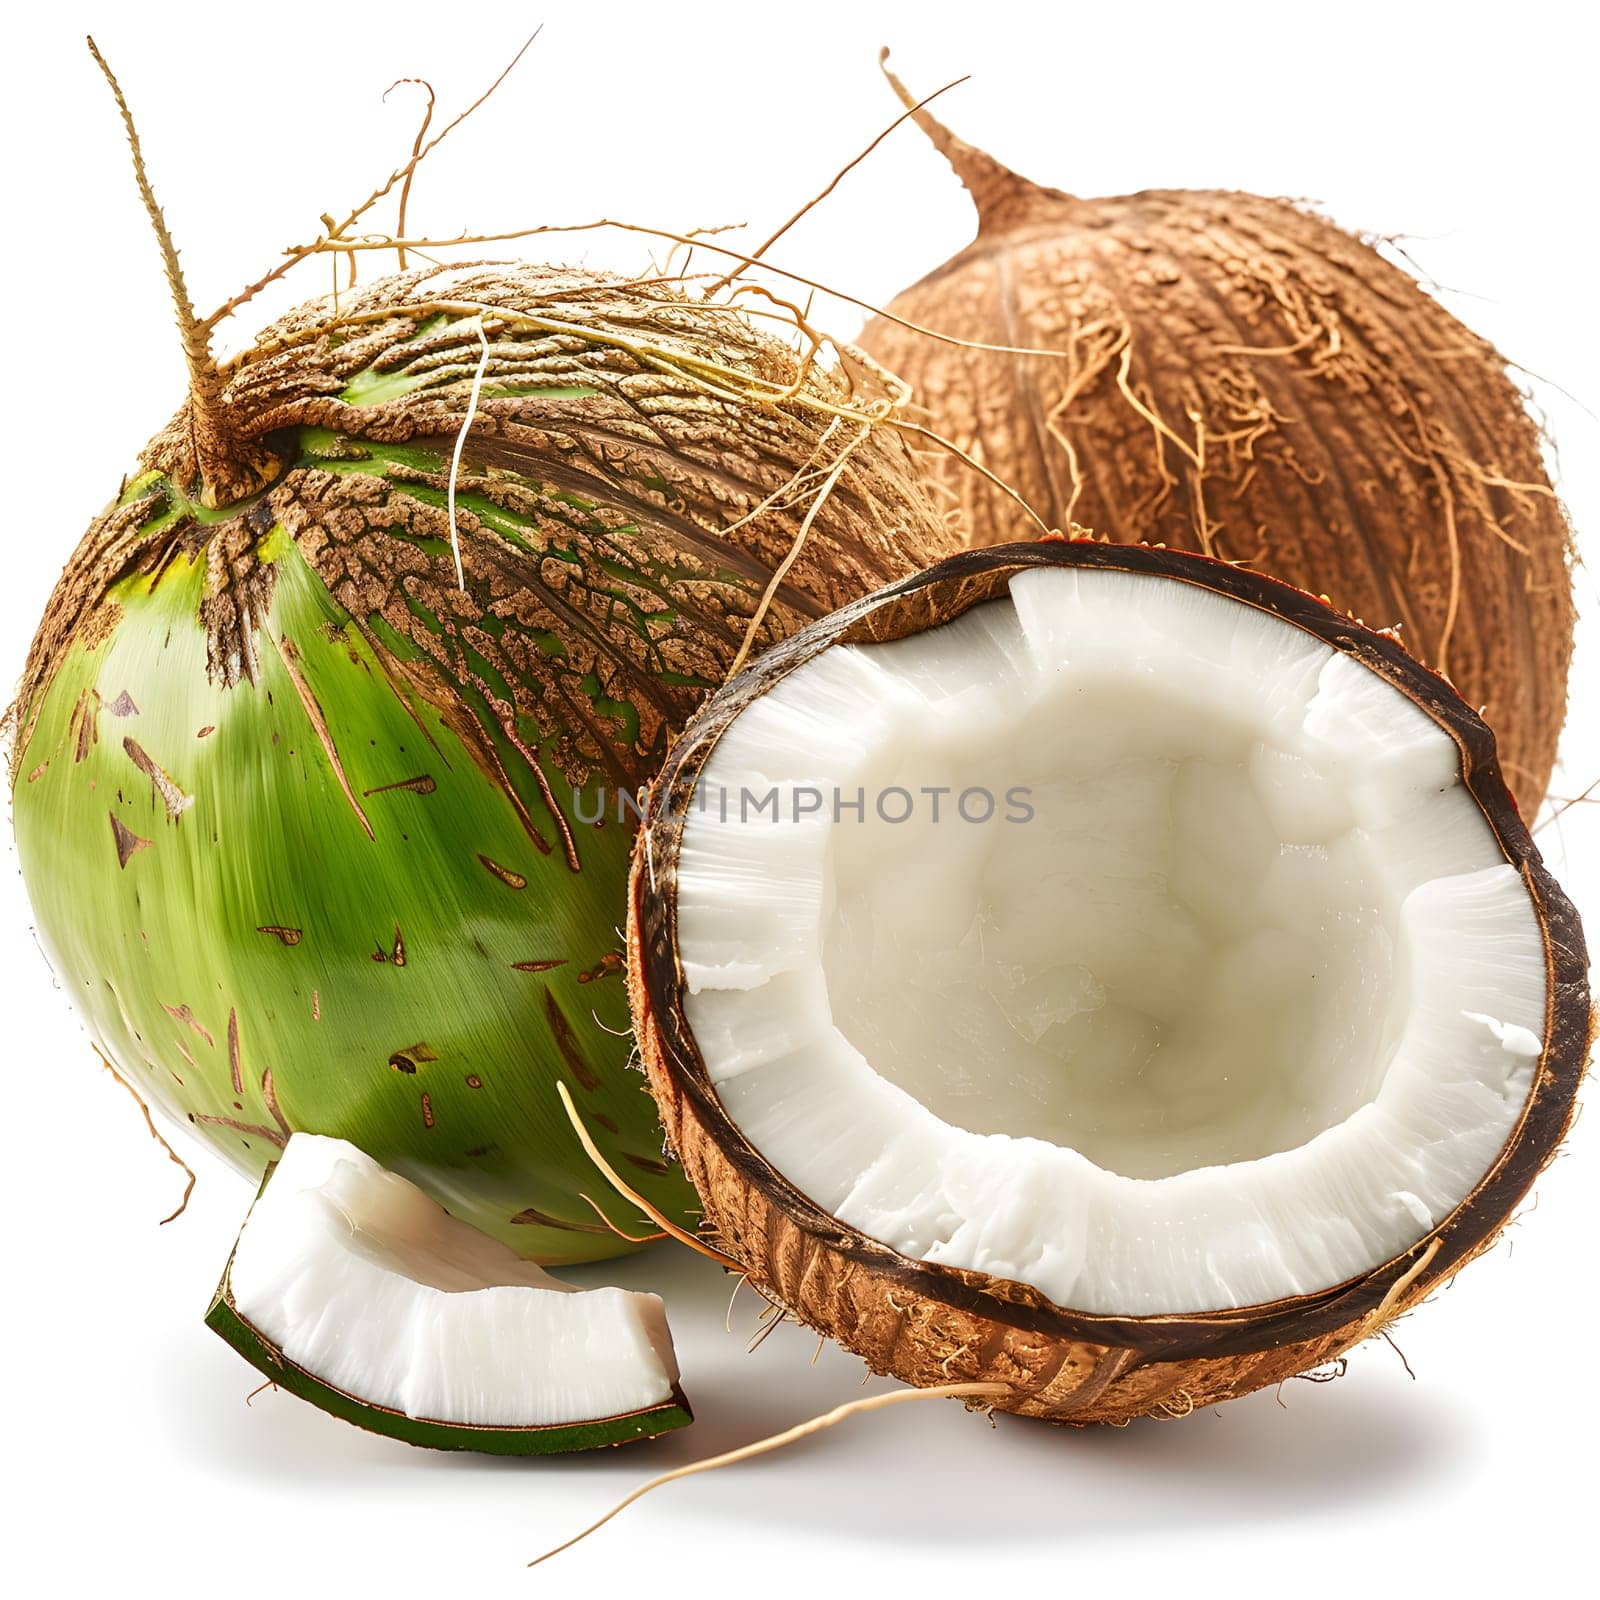 Two regular coconuts and one green coconut are displayed on a white background. Coconuts are a staple food and natural ingredient produced by terrestrial plants